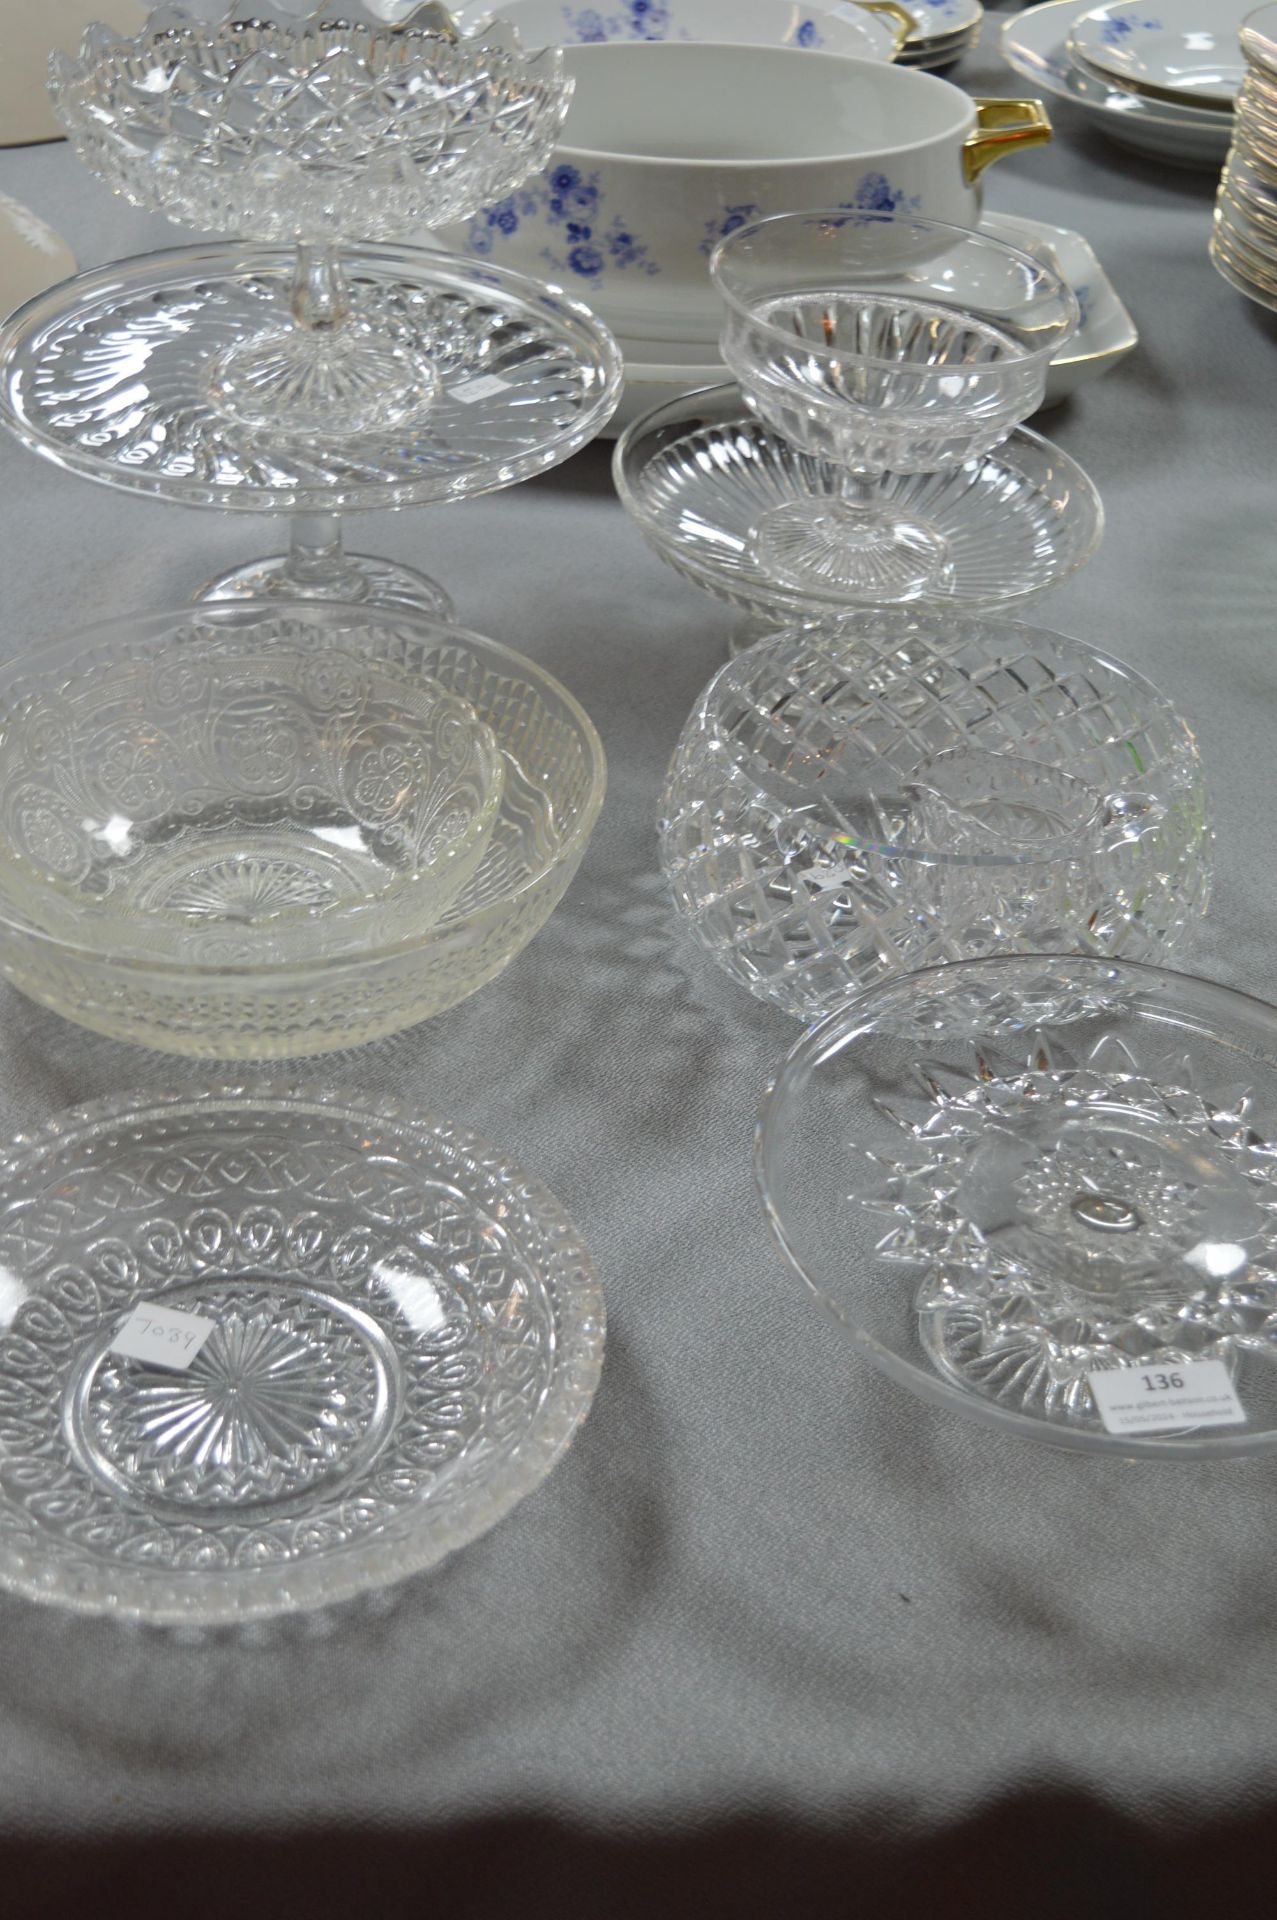 Glass Cake Stands and Trifle Bowls etc.